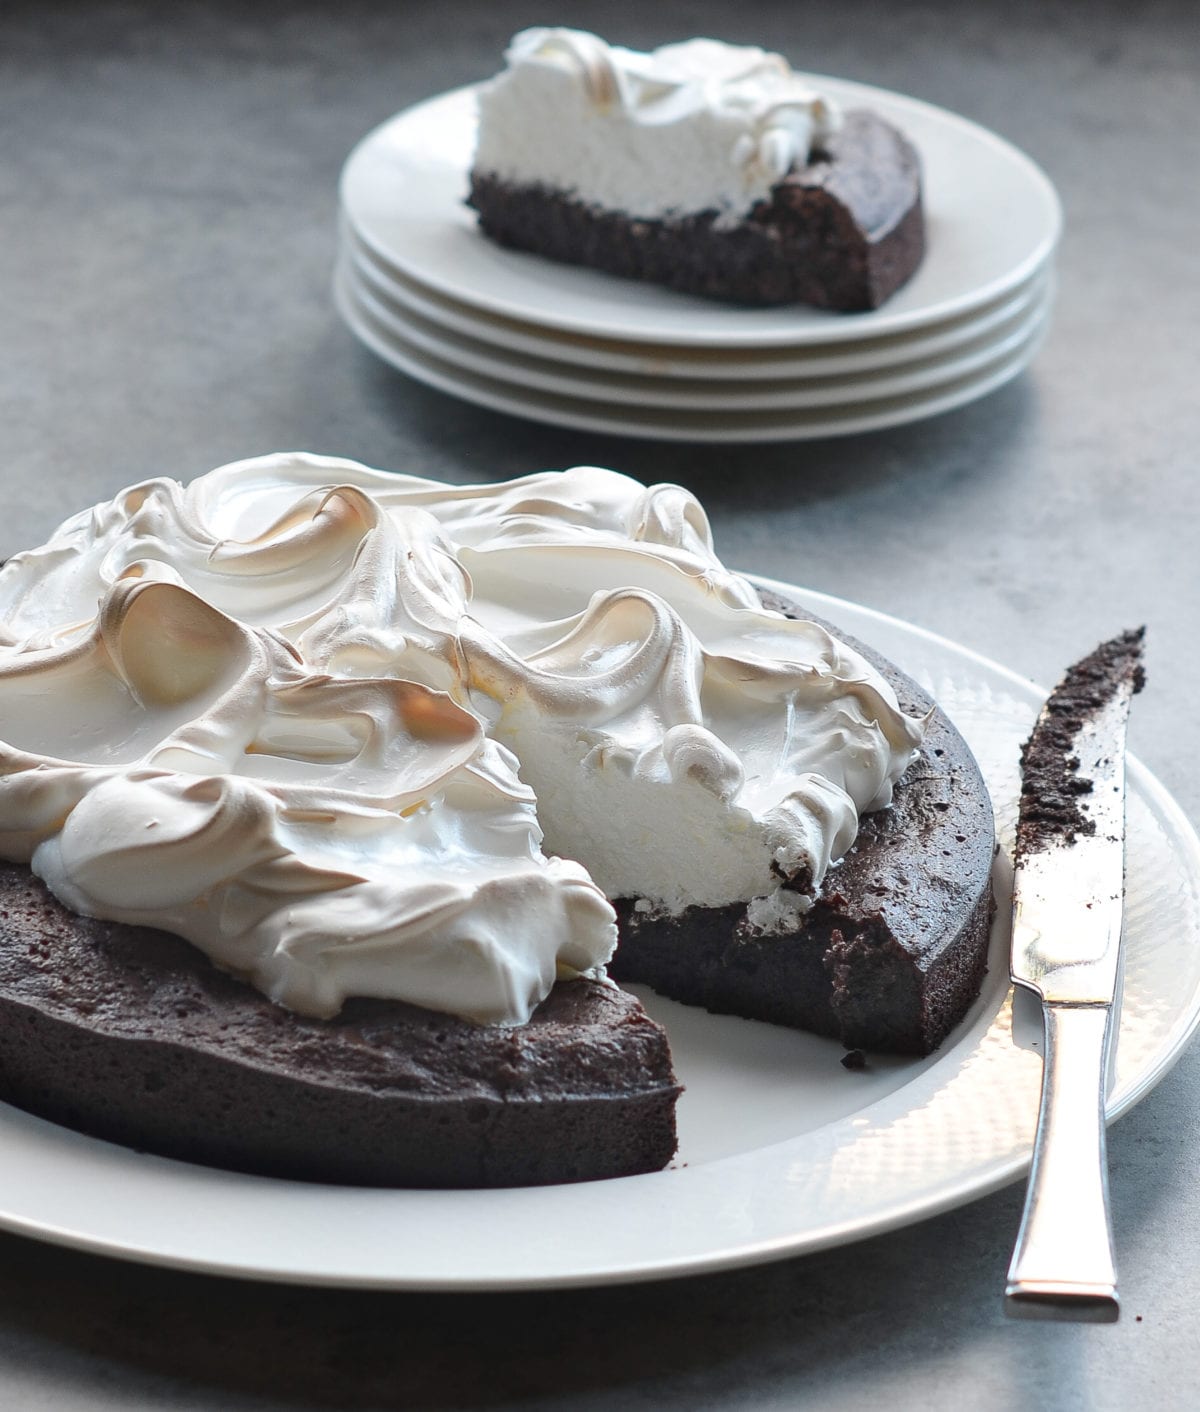 Flourless Chocolate Cake with Meringue - Once Upon a Chef.